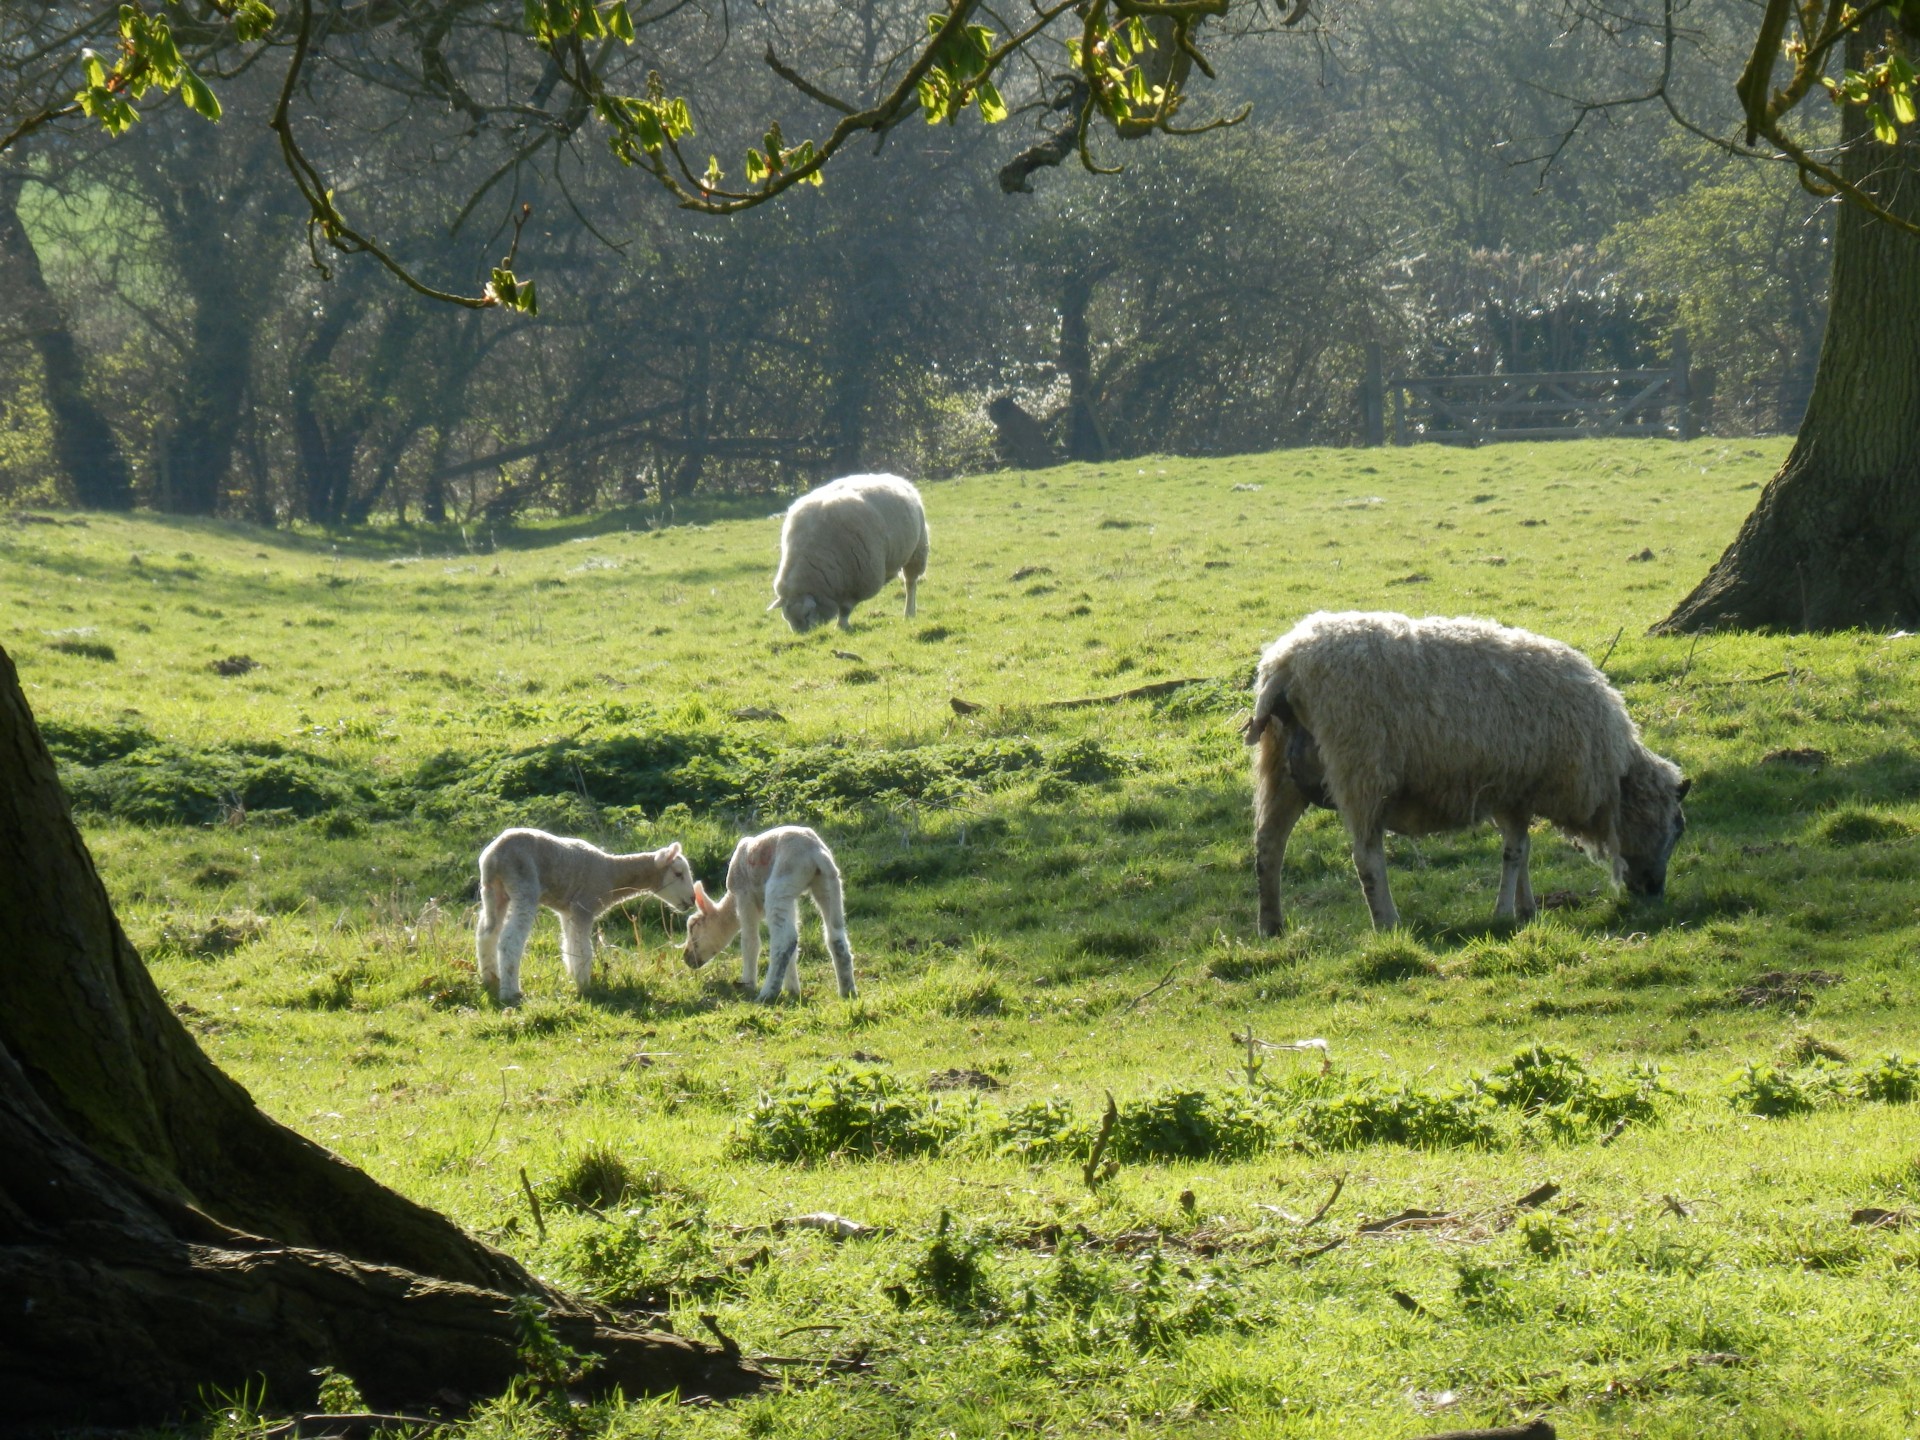 Young spring lambs with their mother in the afternoon sun.